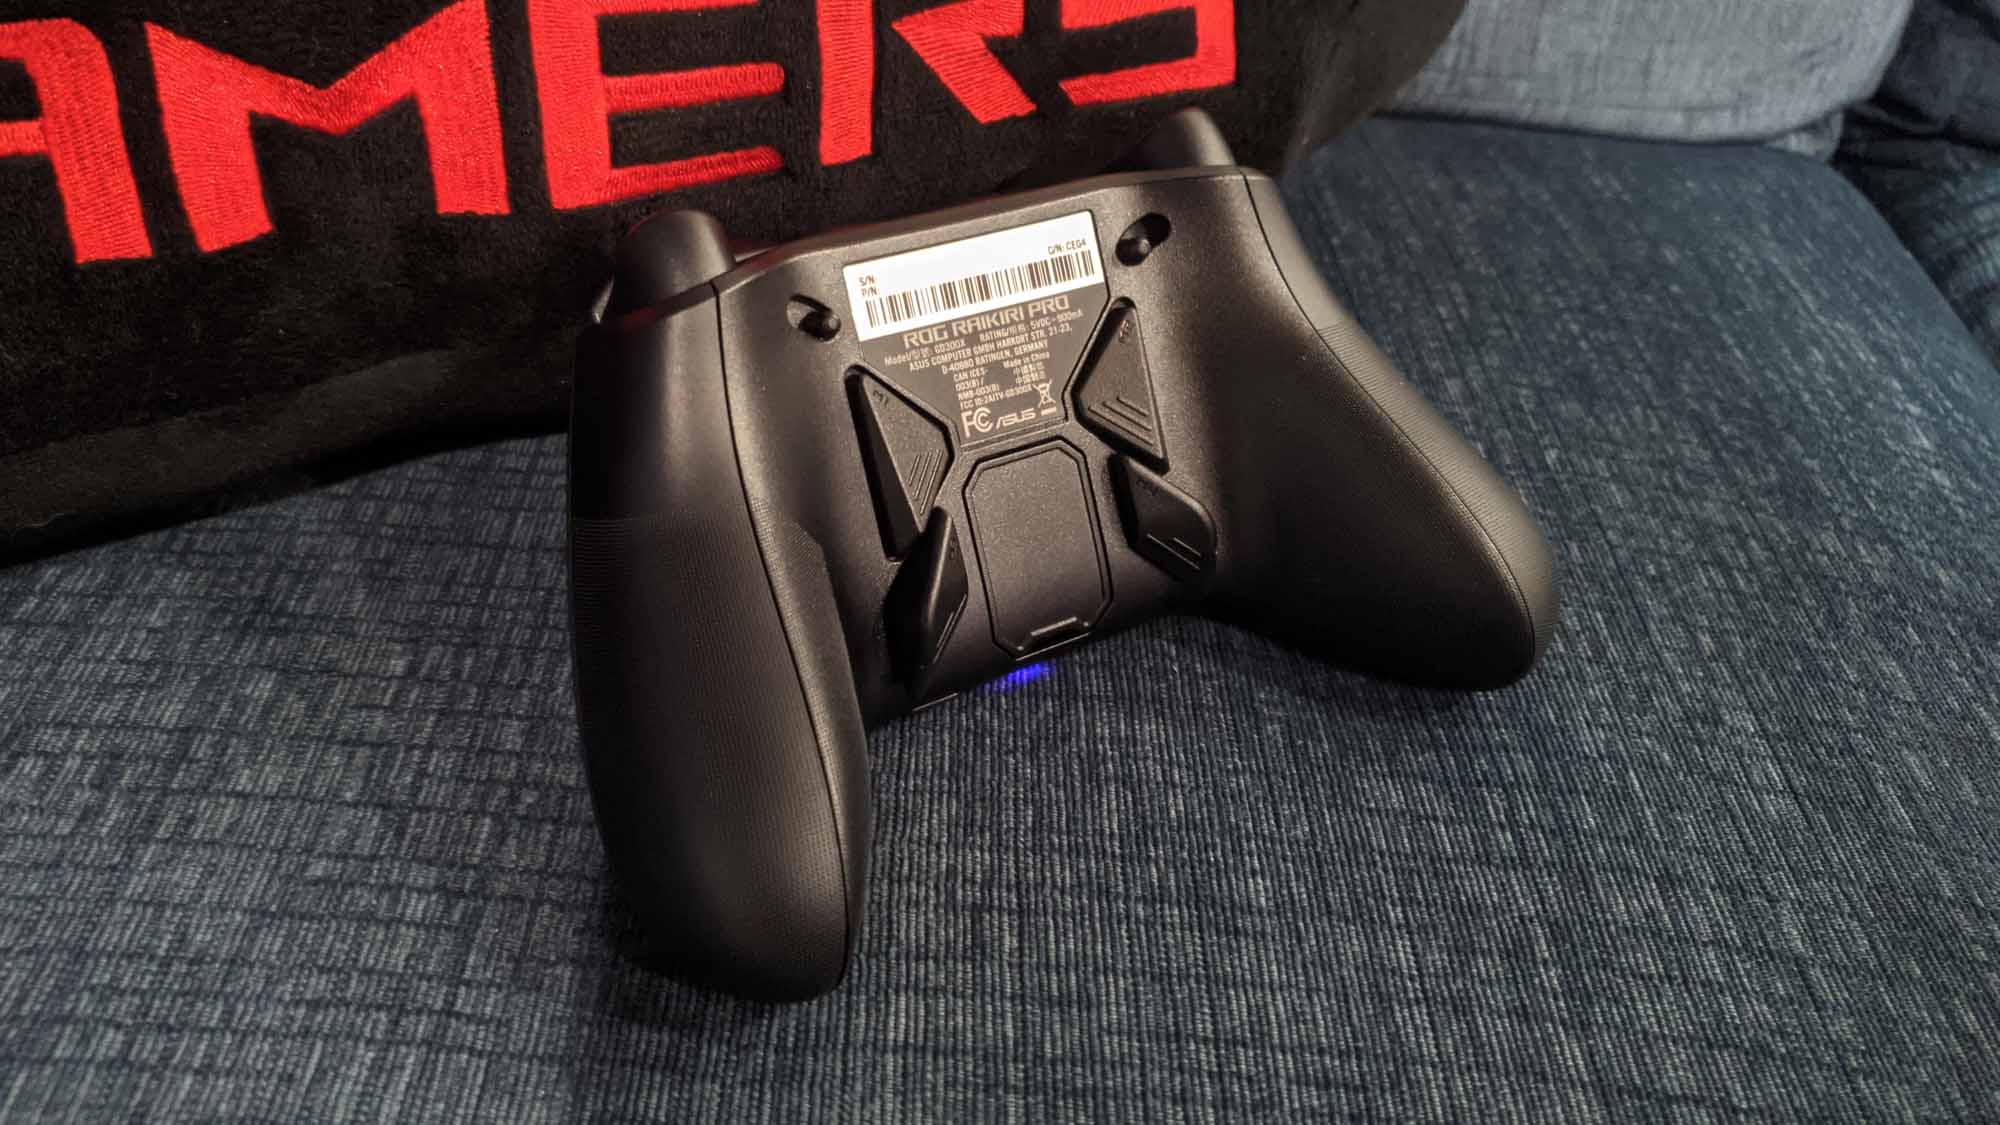 Rear view of the ROG Raikiri Pro controller on a couch.